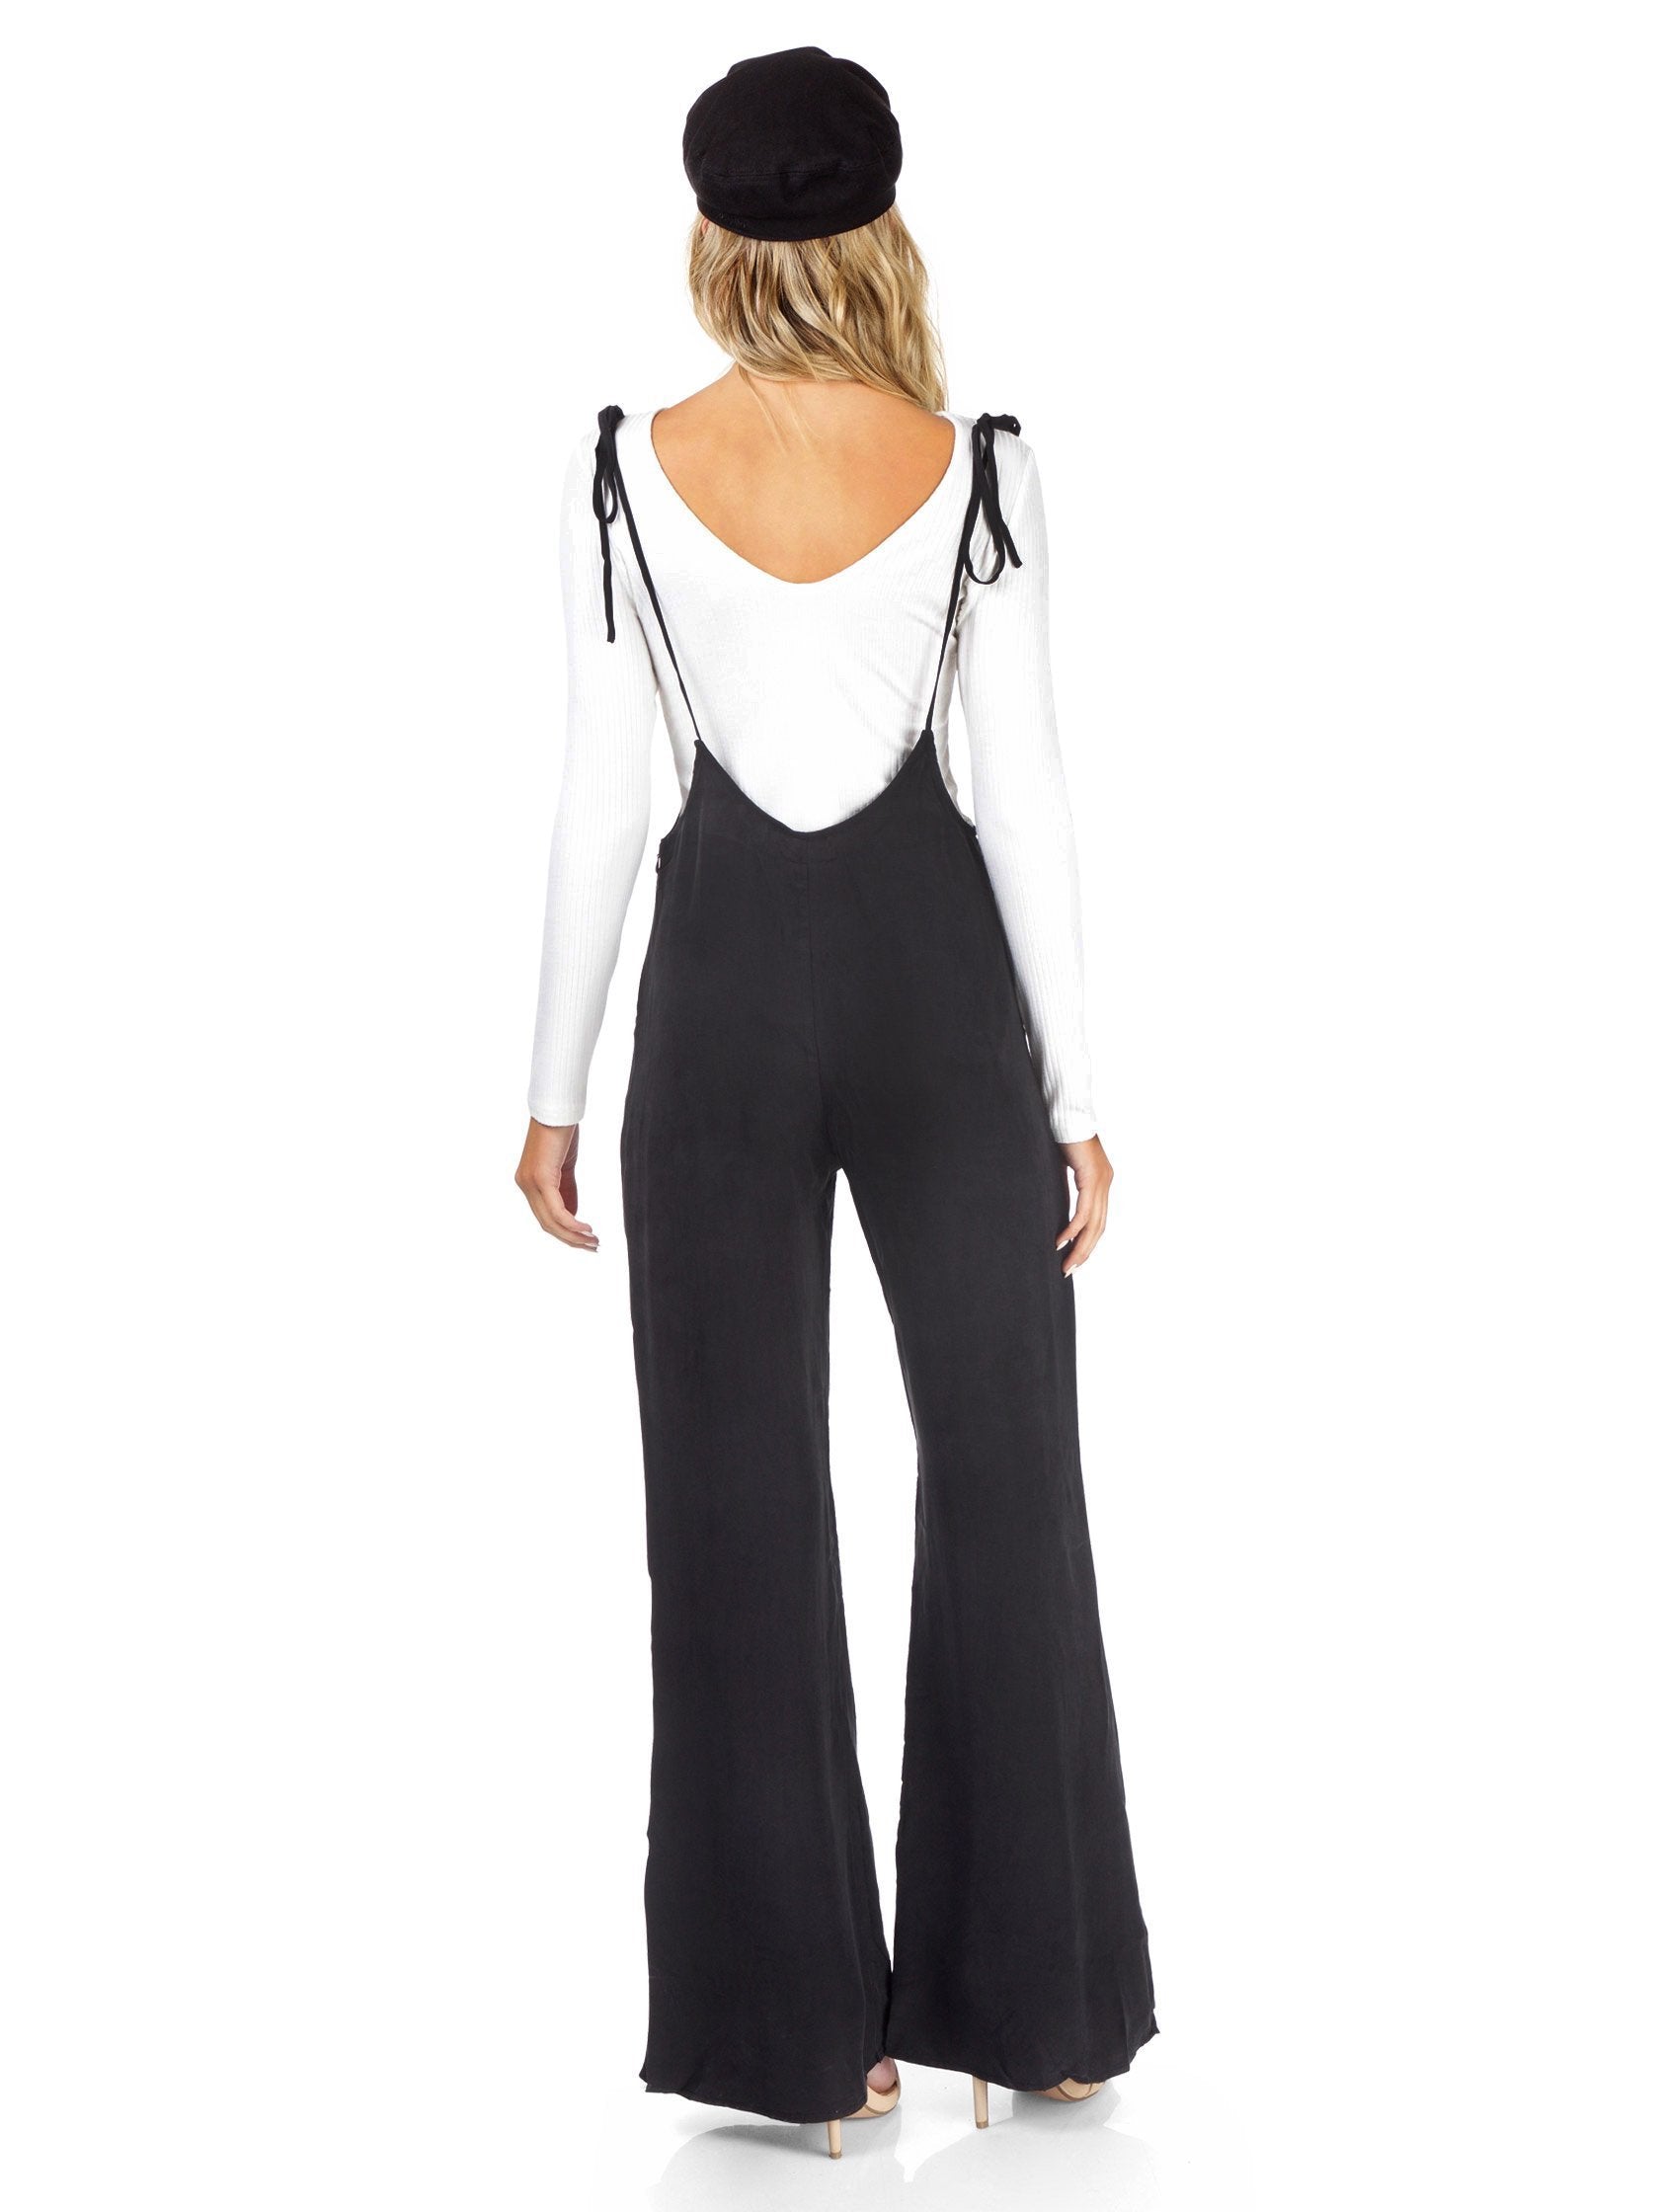 Women wearing a jumpsuit rental from FashionPass called Sasha Jumpsuit